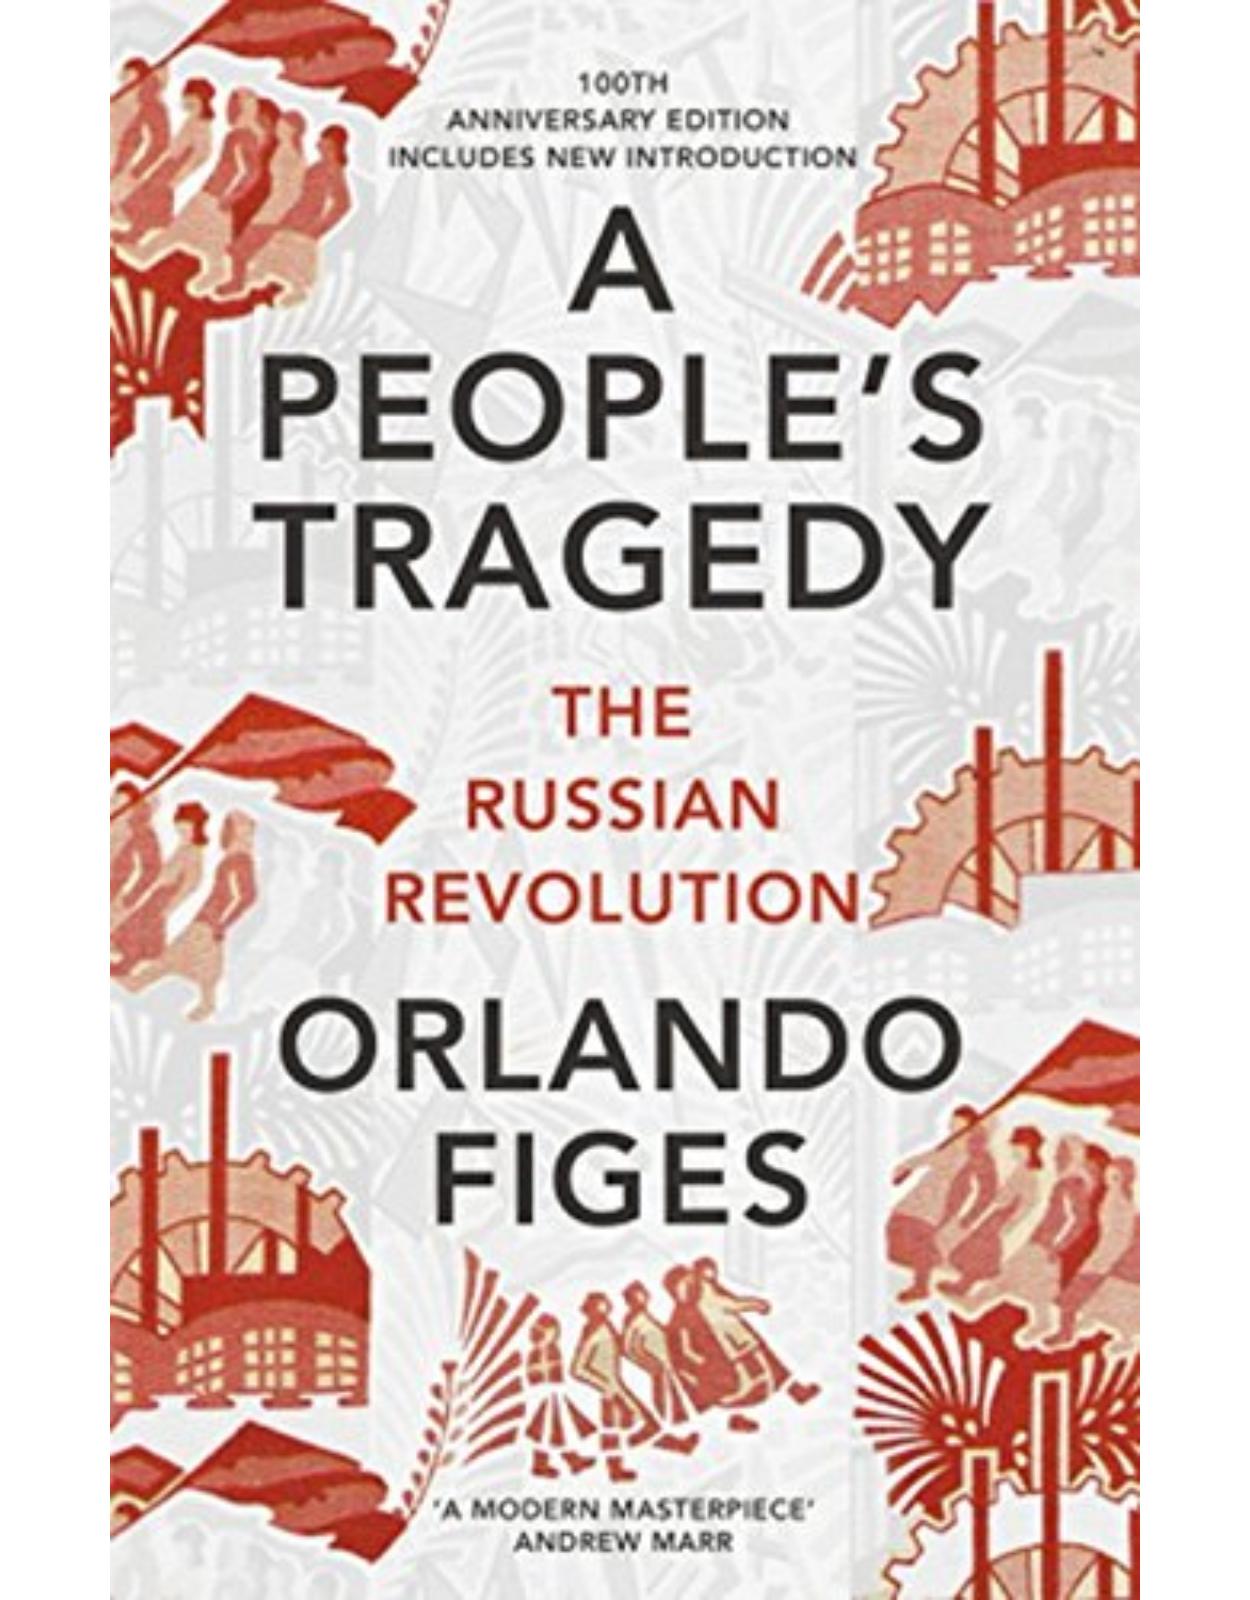 A PeopleÂ’s Tragedy: The Russian Revolution â€“ centenary edition with new introduction